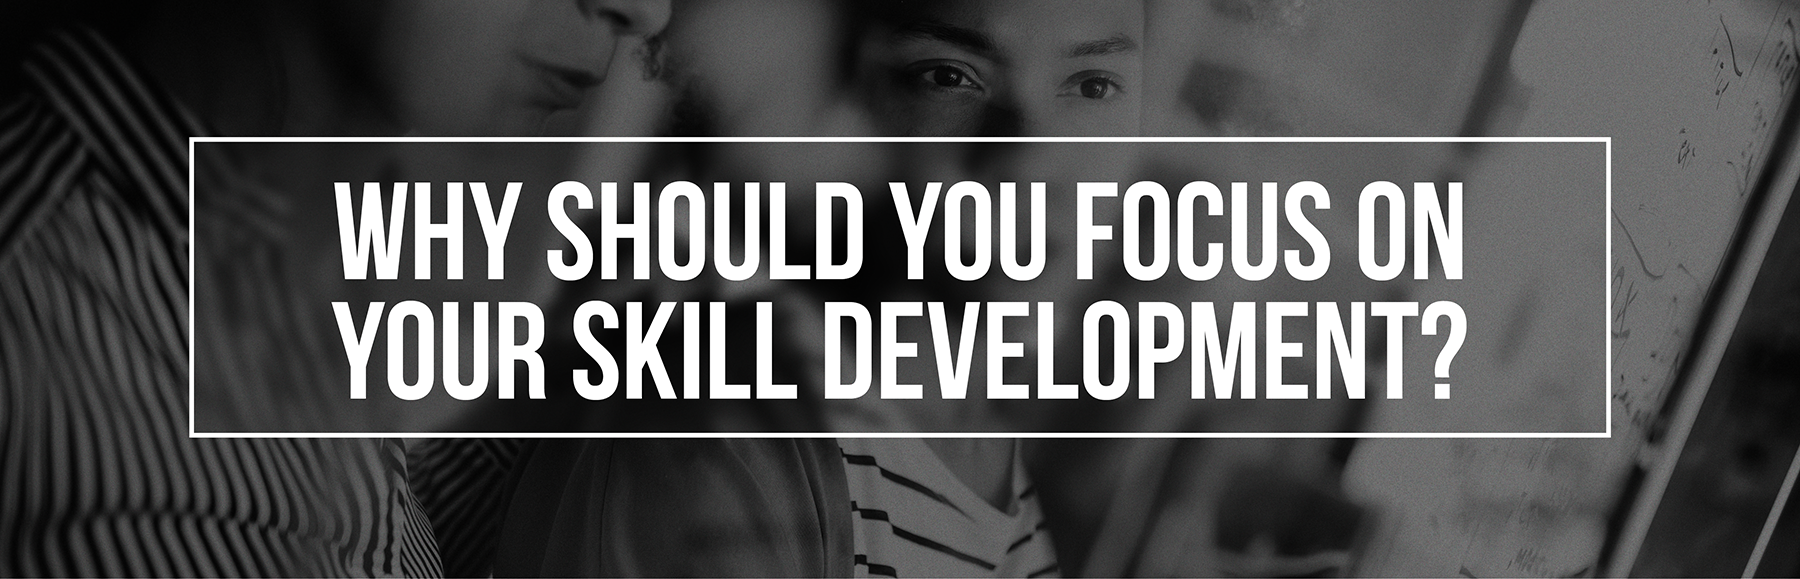 why-you-should-focus-skill